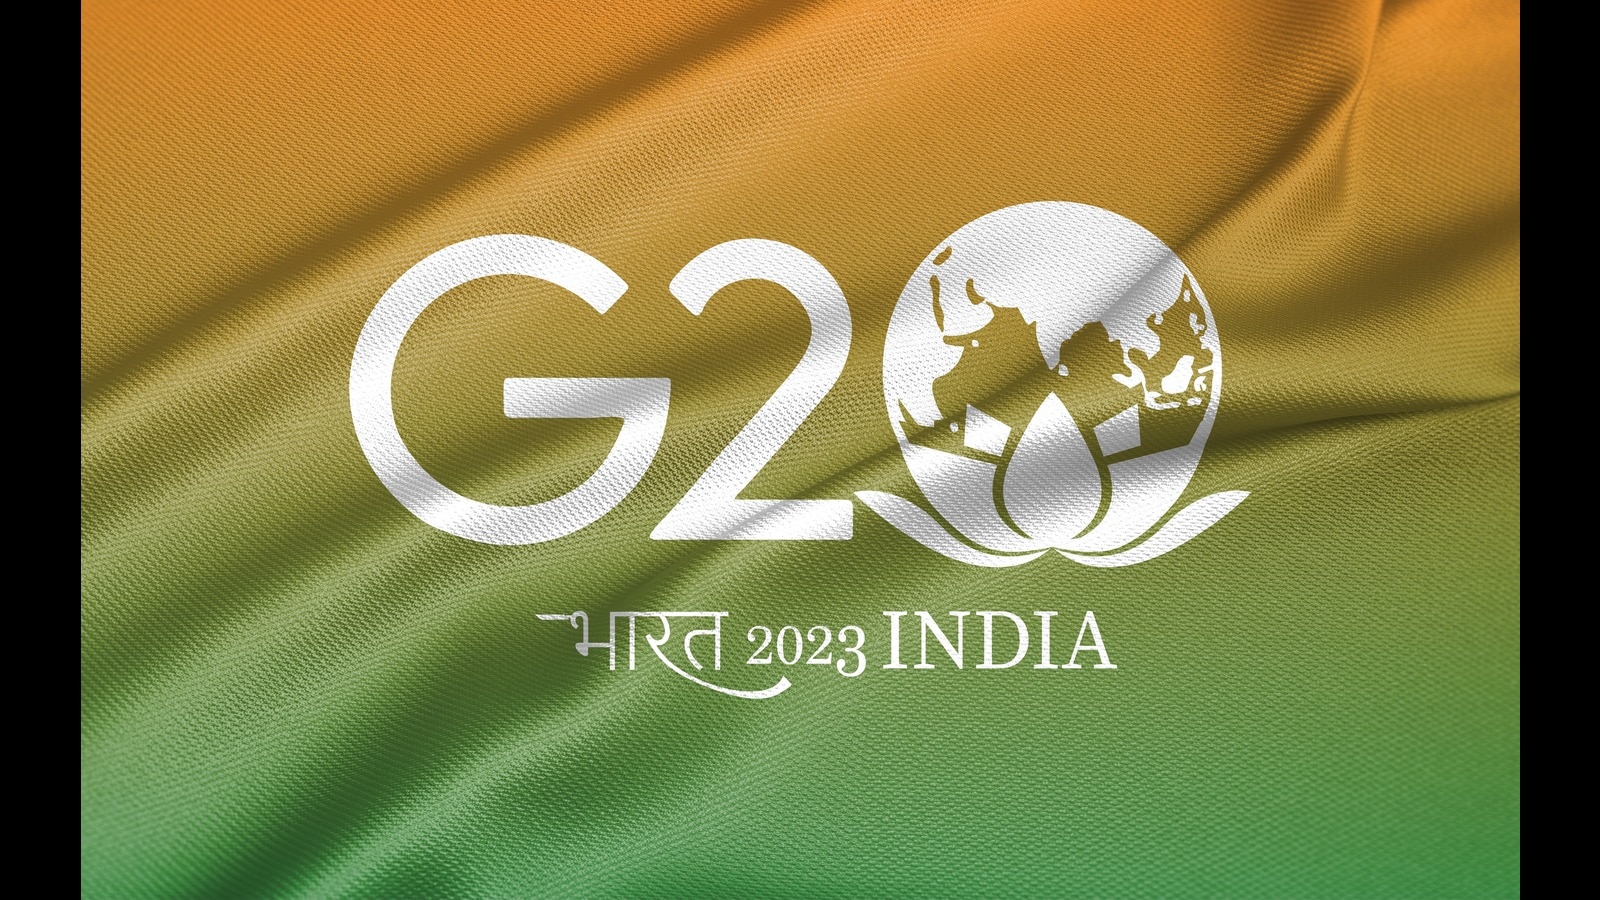 essay on g20 and india's presidency